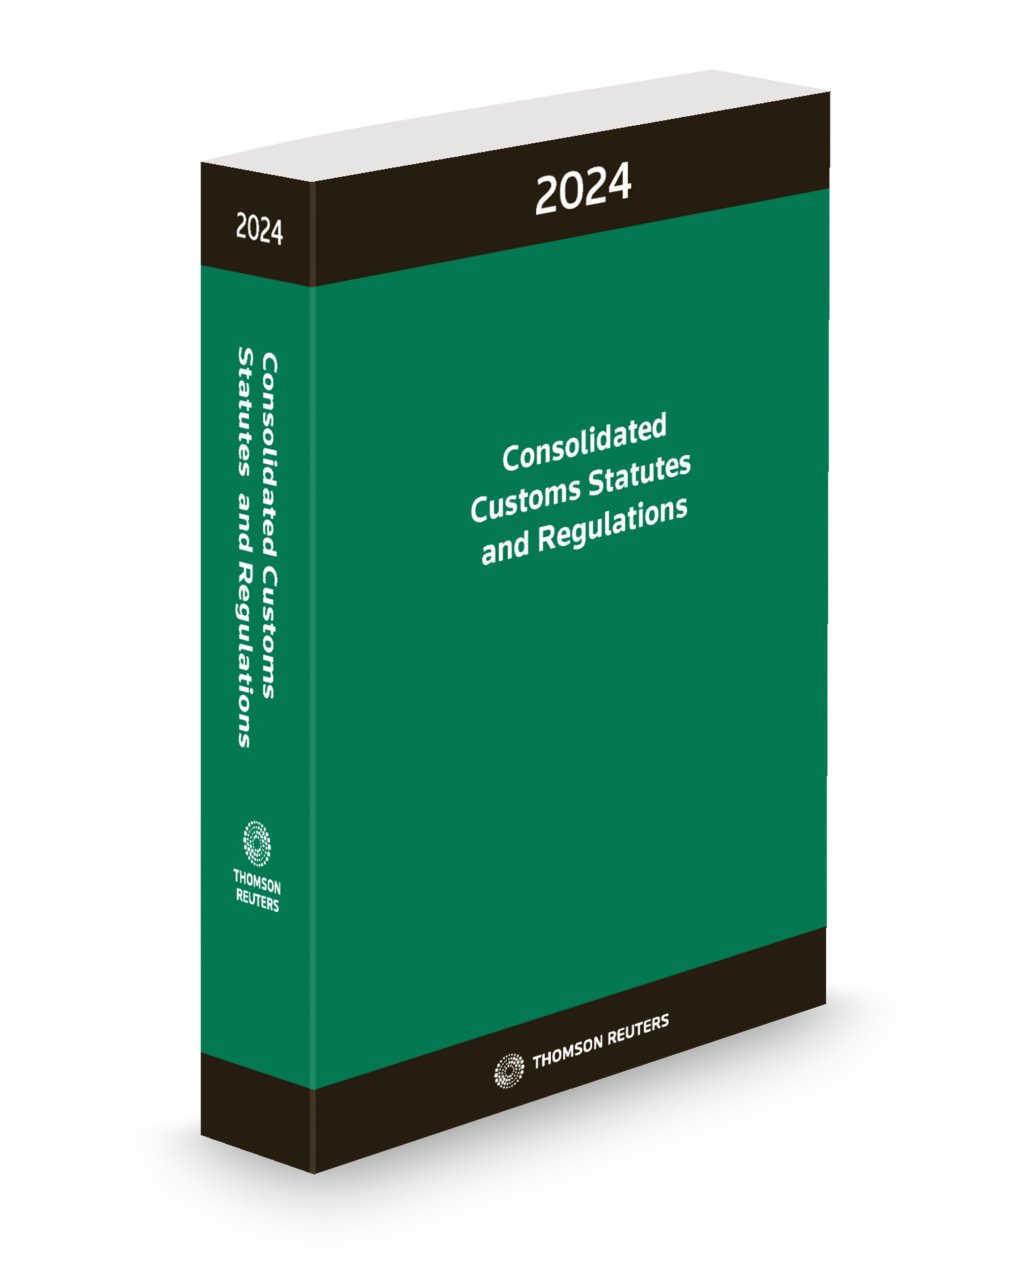 Cover of Consolidated Customs Statutes and Regulations 2024